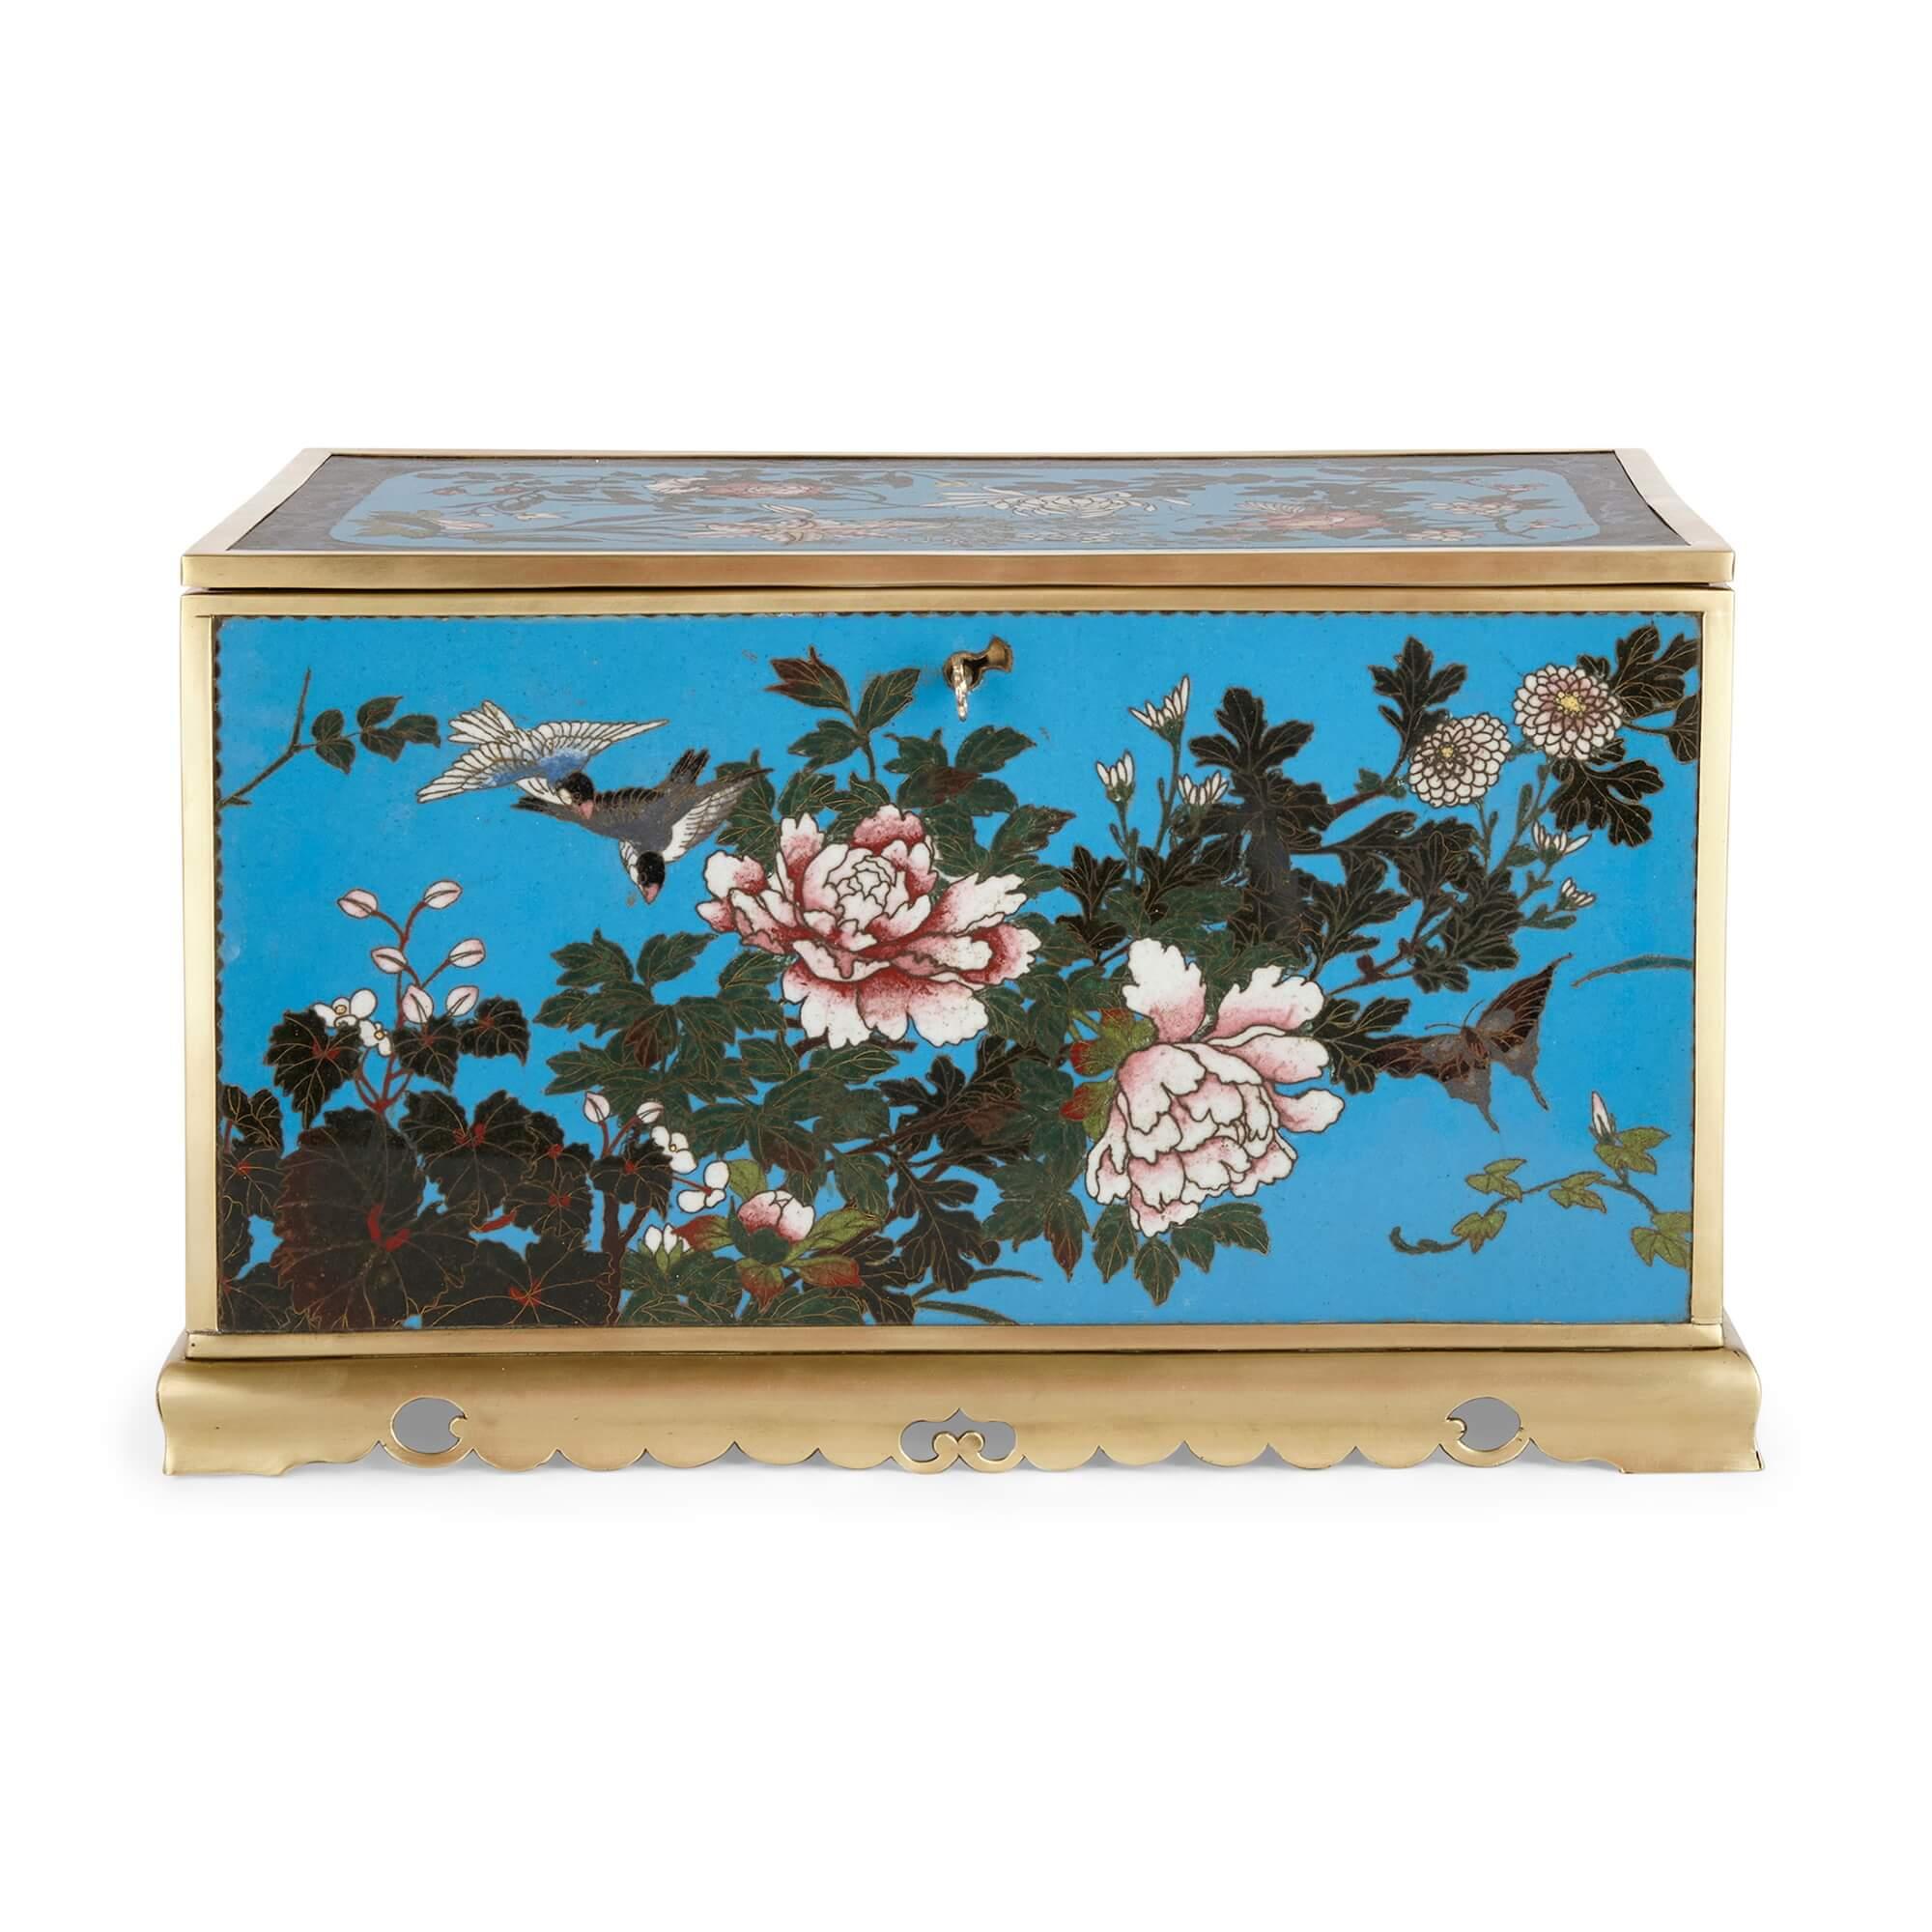 A large Meiji period brass and cloisonné enamel casket
Japanese, Late 19th Century
Height 20cm, width 35.5cm, depth 22cm

This beautiful piece is a Japanese casket cast in brass, and features a series of vibrant, elegantly crafted cloisonné